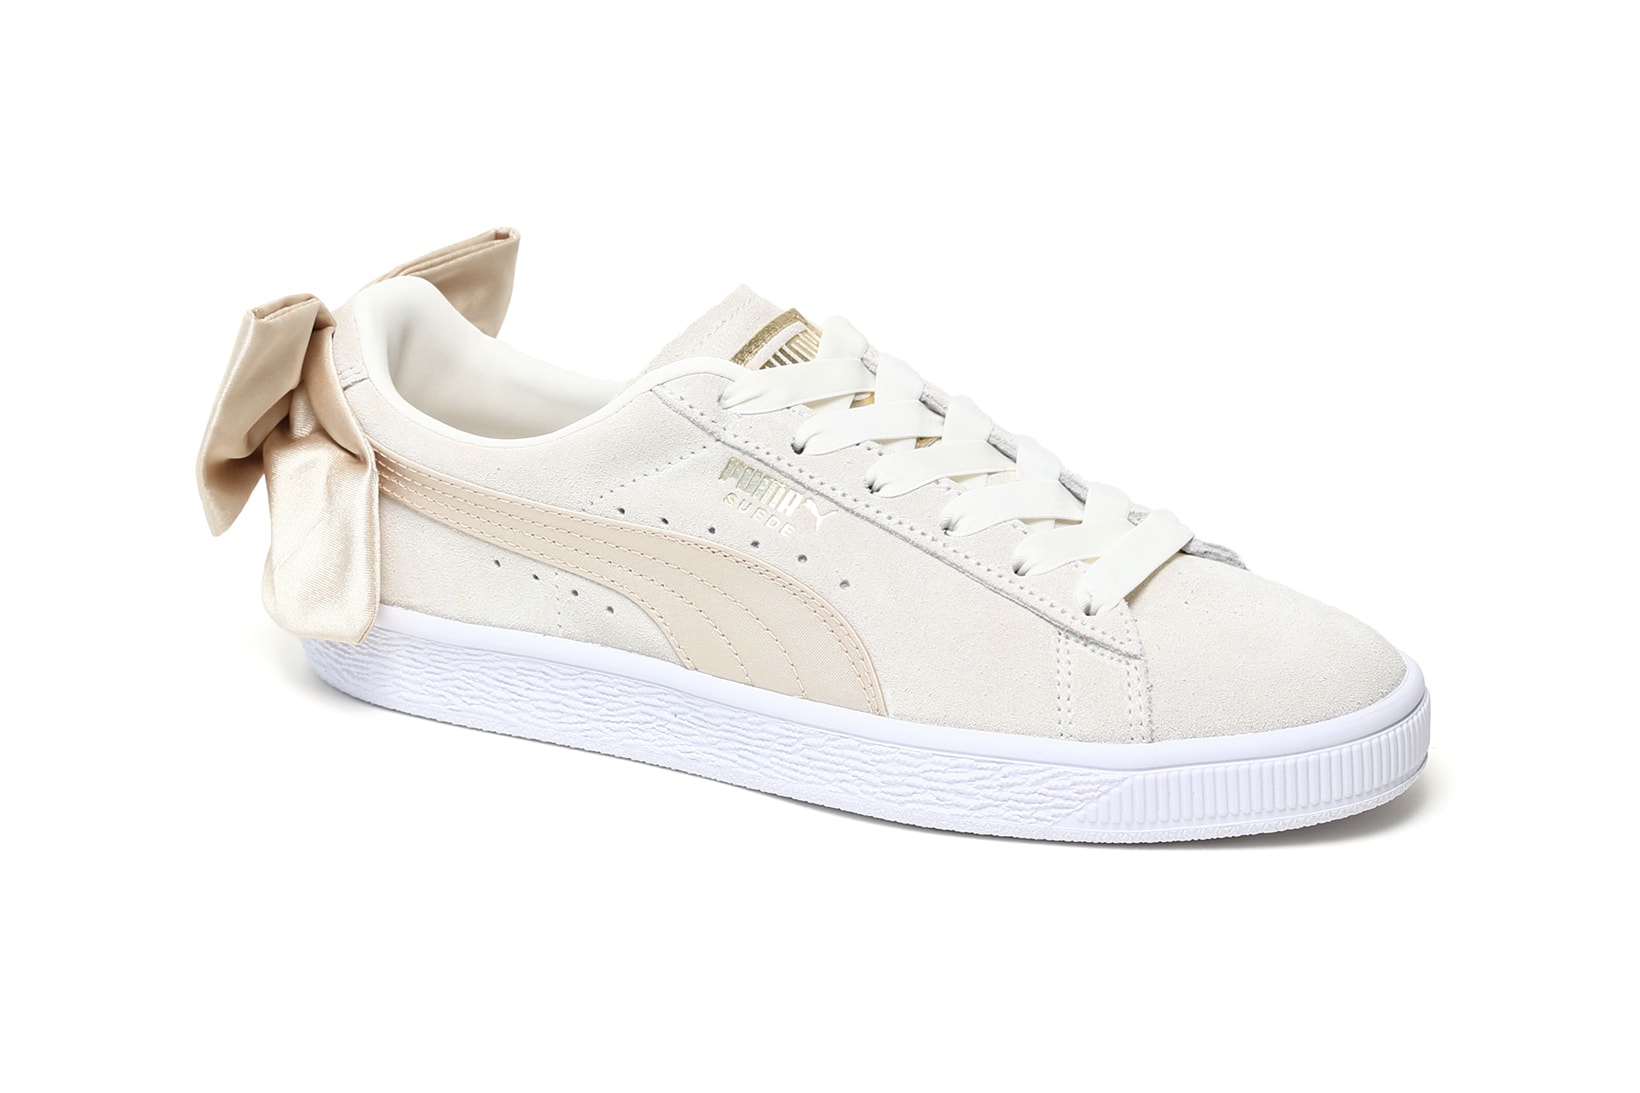 PUMA Suede Bow Varsity Marshmallow Women's Sneakers